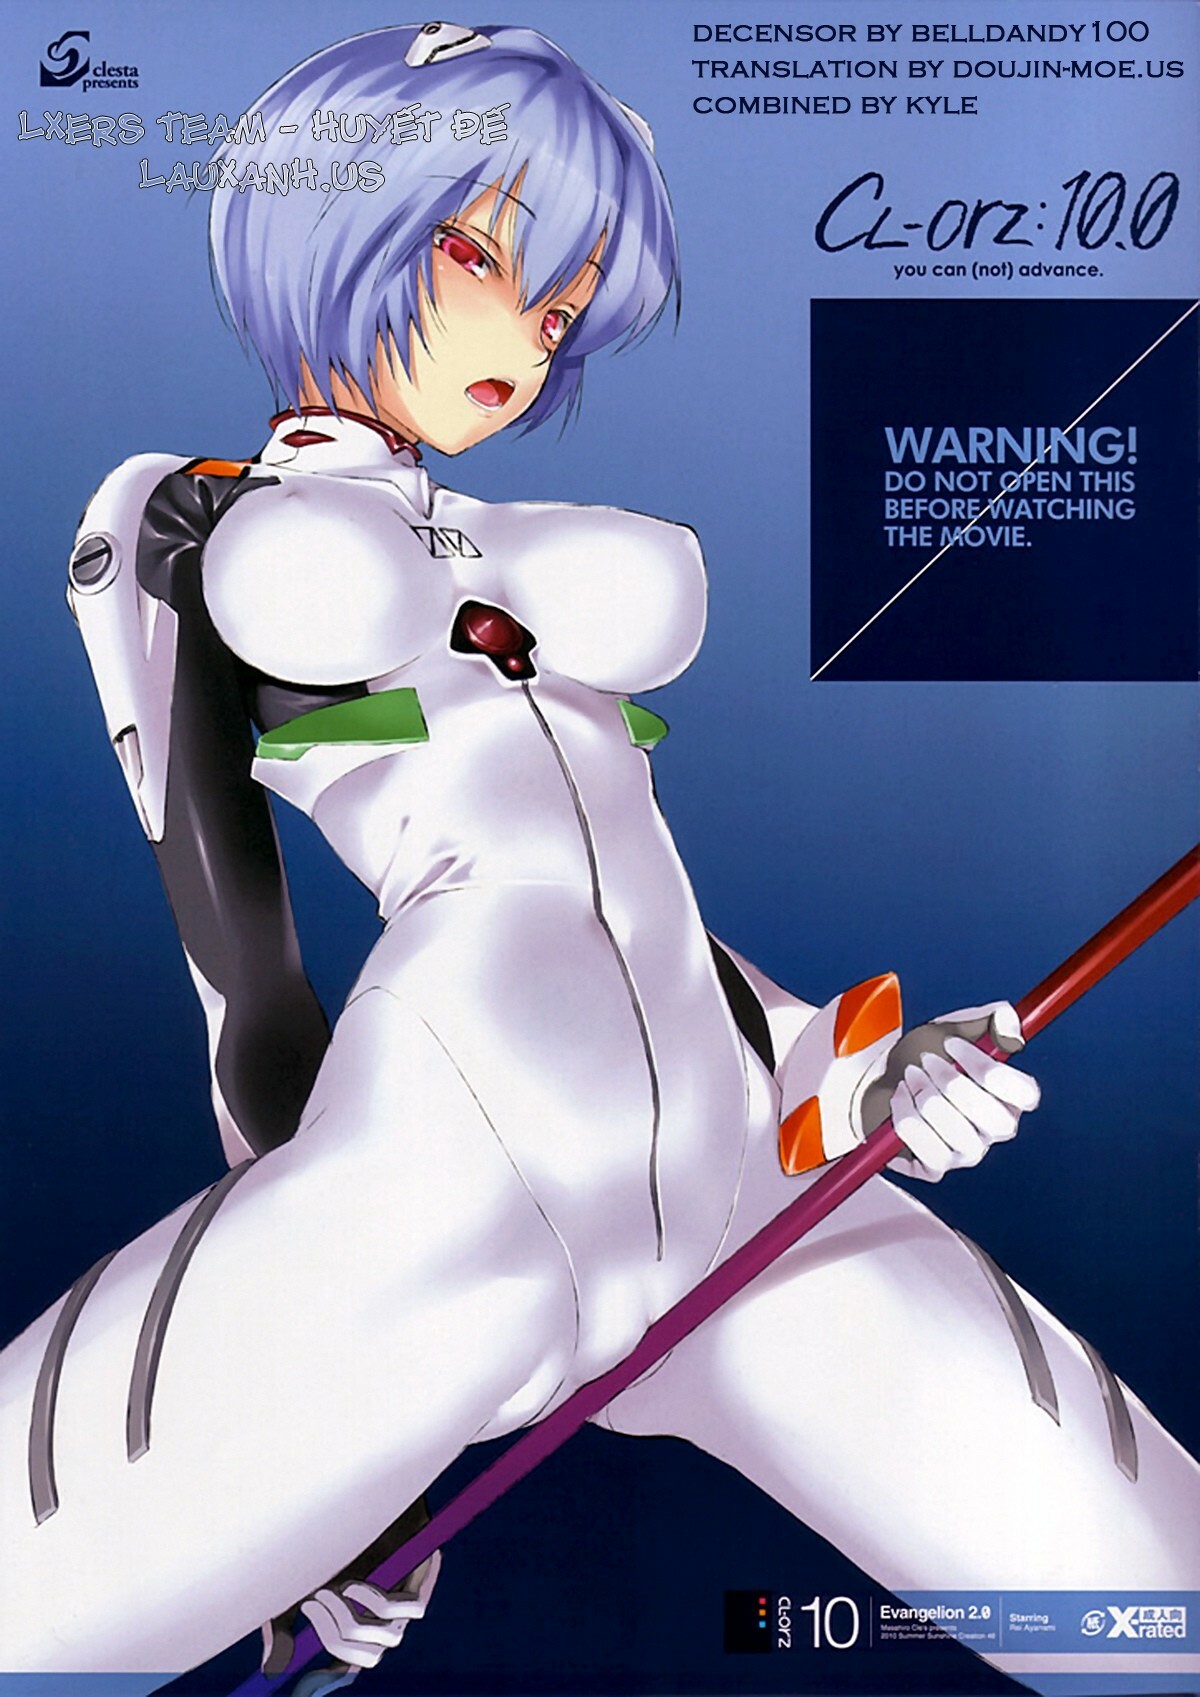 (SC48) [Clesta (Cle Masahiro)] CL-orz: 10.0 - you can (not) advance (Rebuild of Evangelion) [Vietnamese Tiếng Việt] [Decensored] page 1 full